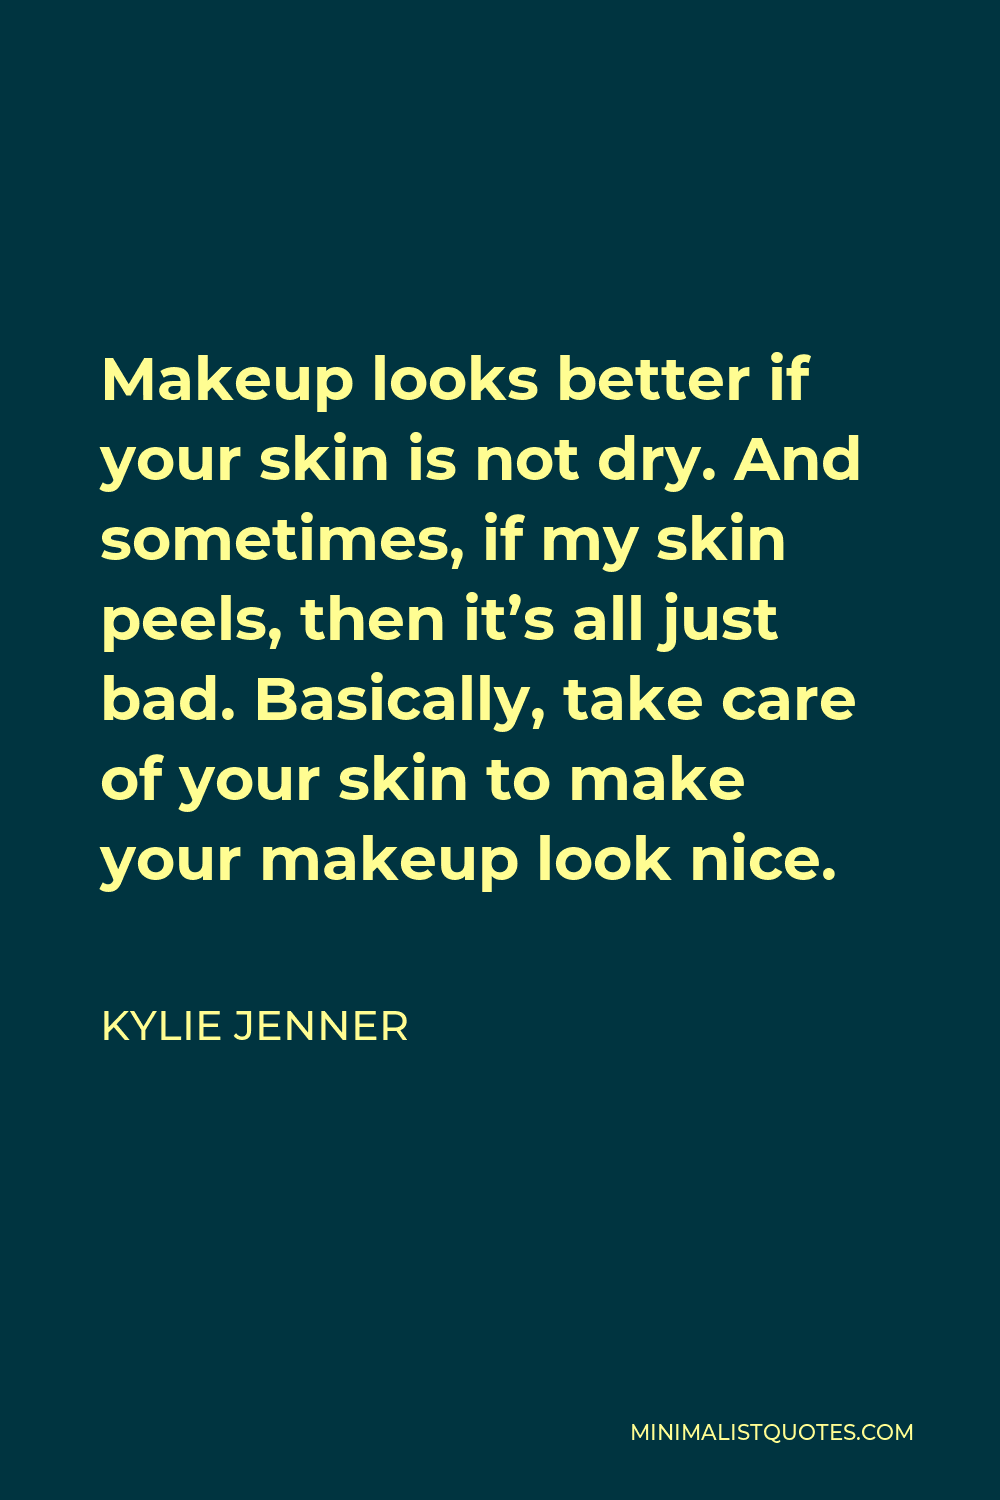 Kylie Jenner Quote - Makeup looks better if your skin is not dry. And sometimes, if my skin peels, then it’s all just bad. Basically, take care of your skin to make your makeup look nice.